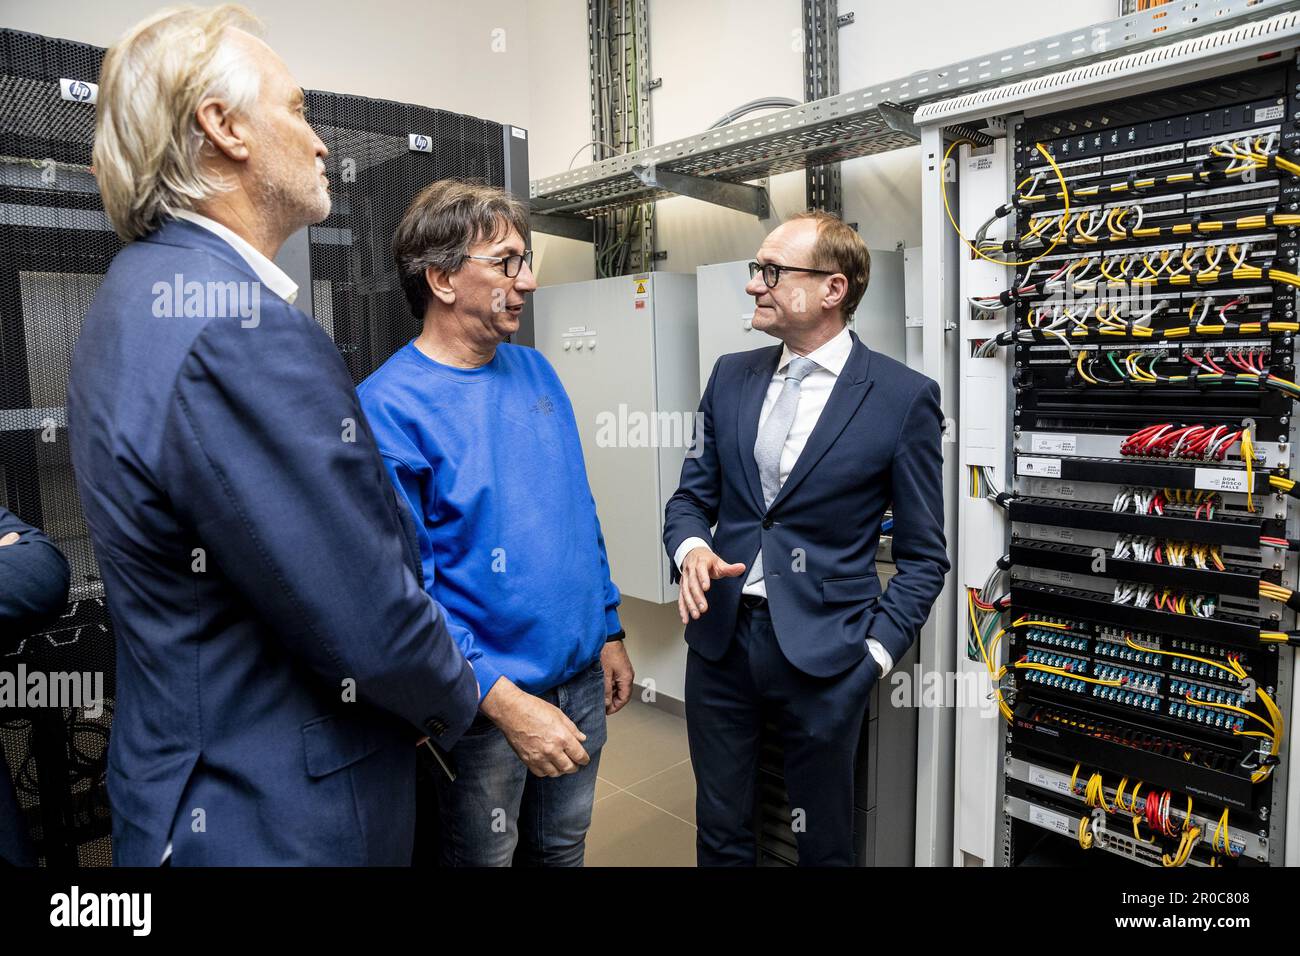 FOCUS COVERAGE REQUESTED TO BELGA - Telenet CEO John Porter and Flemish Minister of Education and Animal Welfare and Sports Ben Weyts receive some information looking at a rack for network cables and switches, during a Press moment to launch a new stage in the Digisprong for schools, at the Technisch Instituut Don Bosco secondary school, in Halle, Monday 08 May 2023. It concerns a framework contract worth 40 million euros between Telenet and the Flemish government, to install fiber optic connections in Flemish schools. Credit: Belga News Agency/Alamy Live News Stock Photo